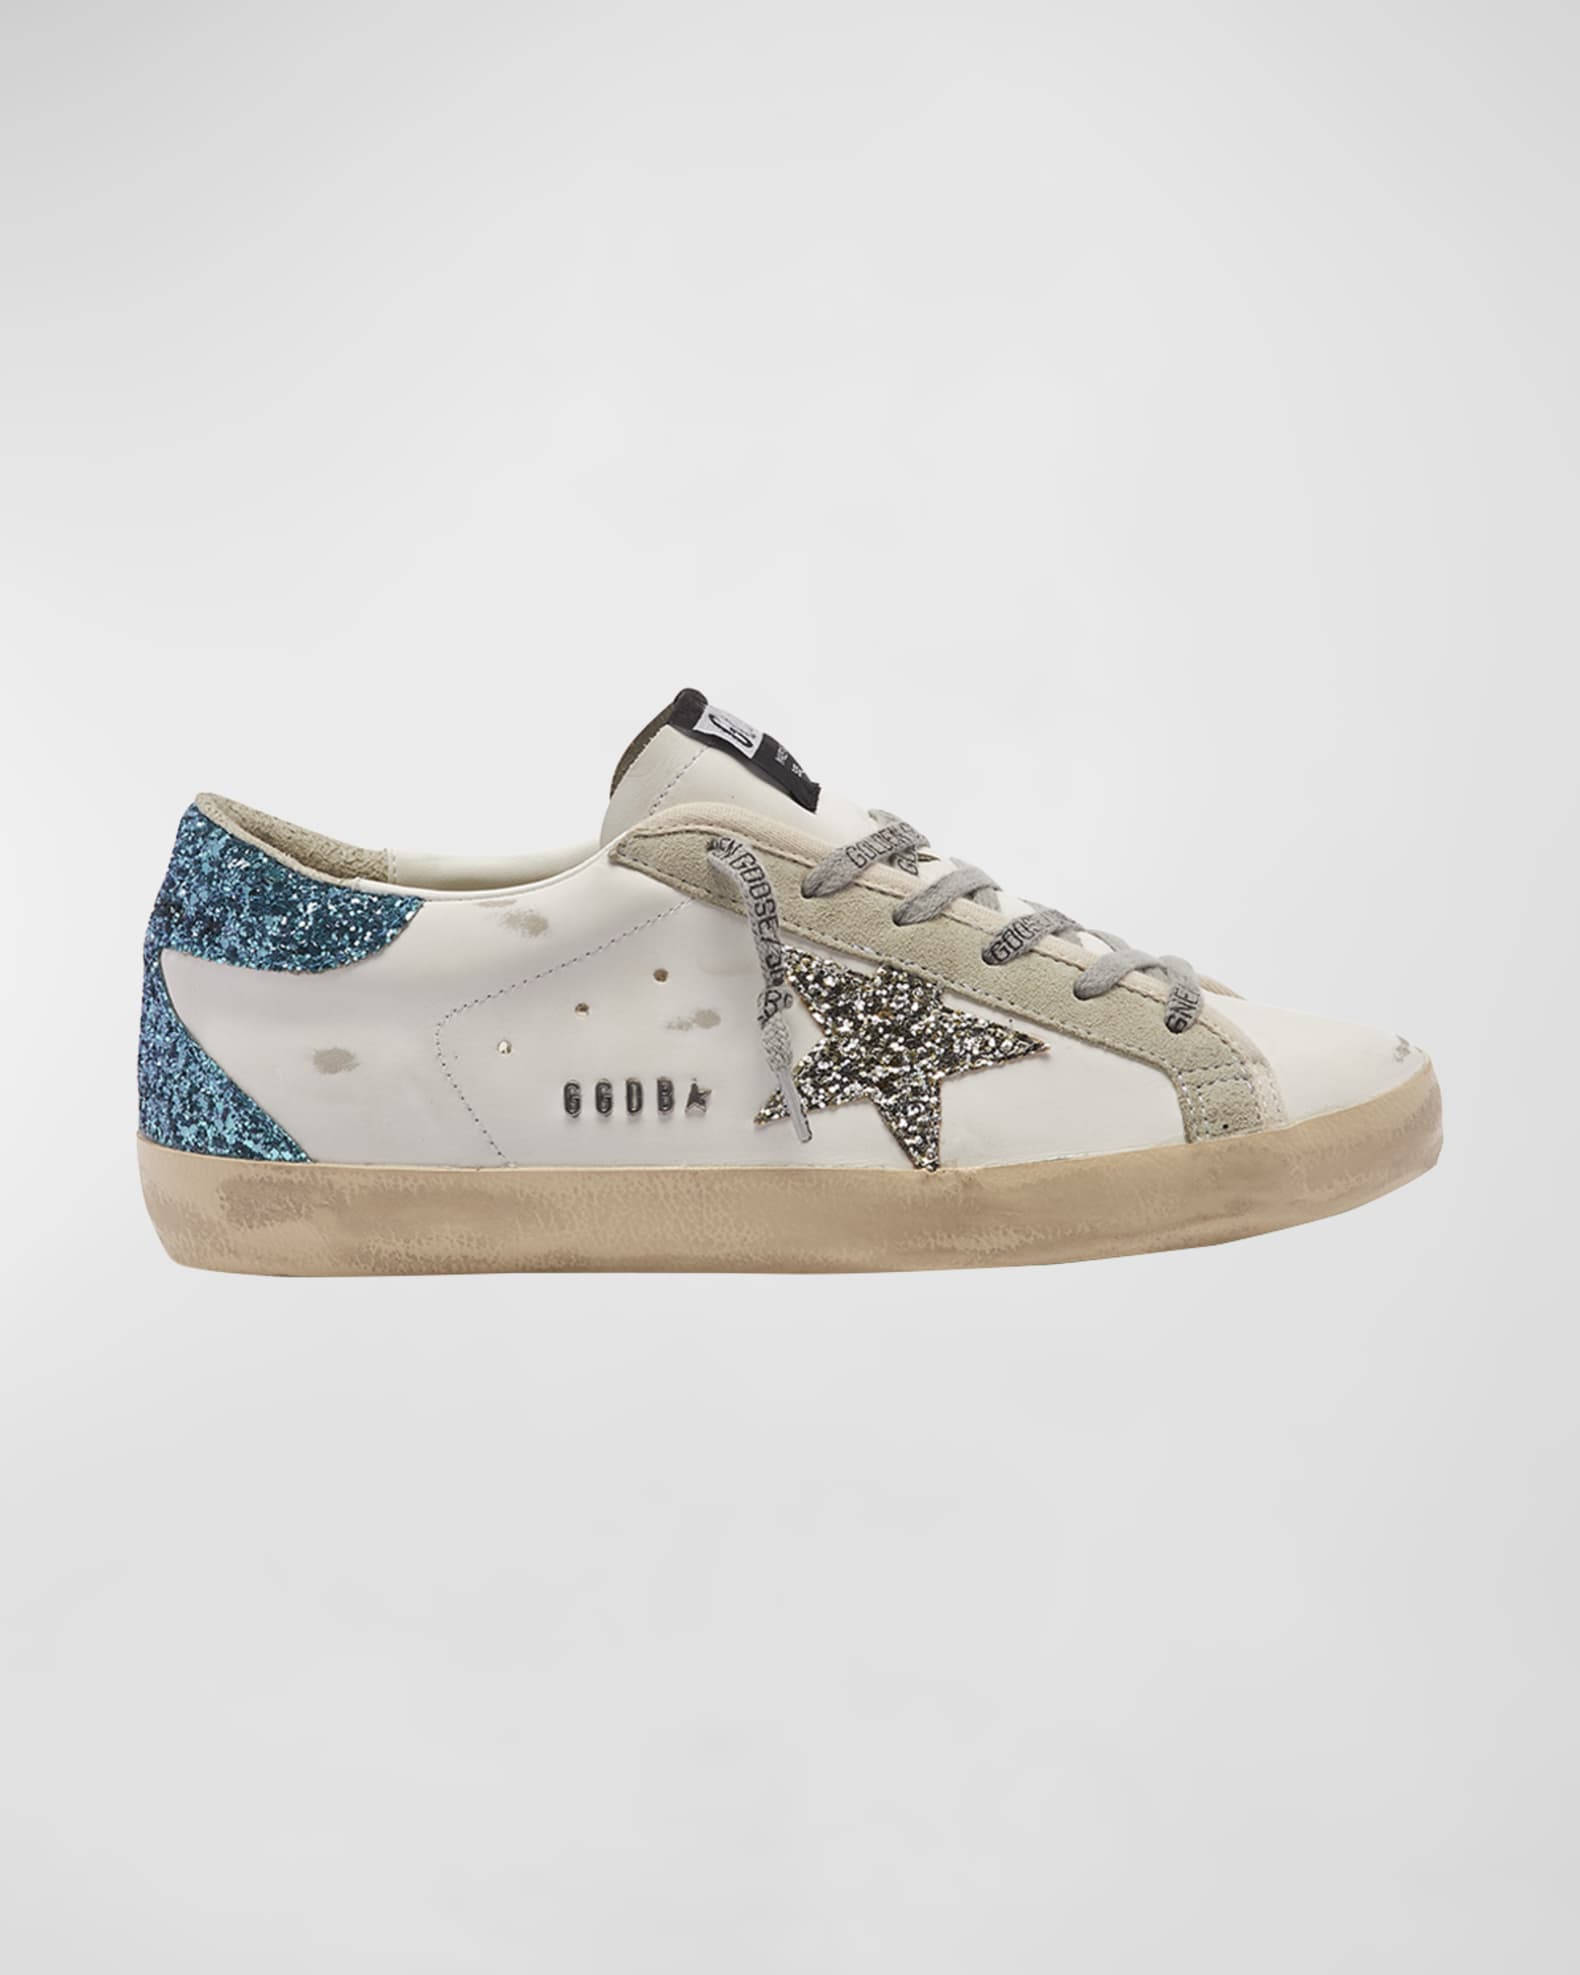 Louis Vuitton Glitter Low-Top Sneakers - Silver Sneakers, Shoes